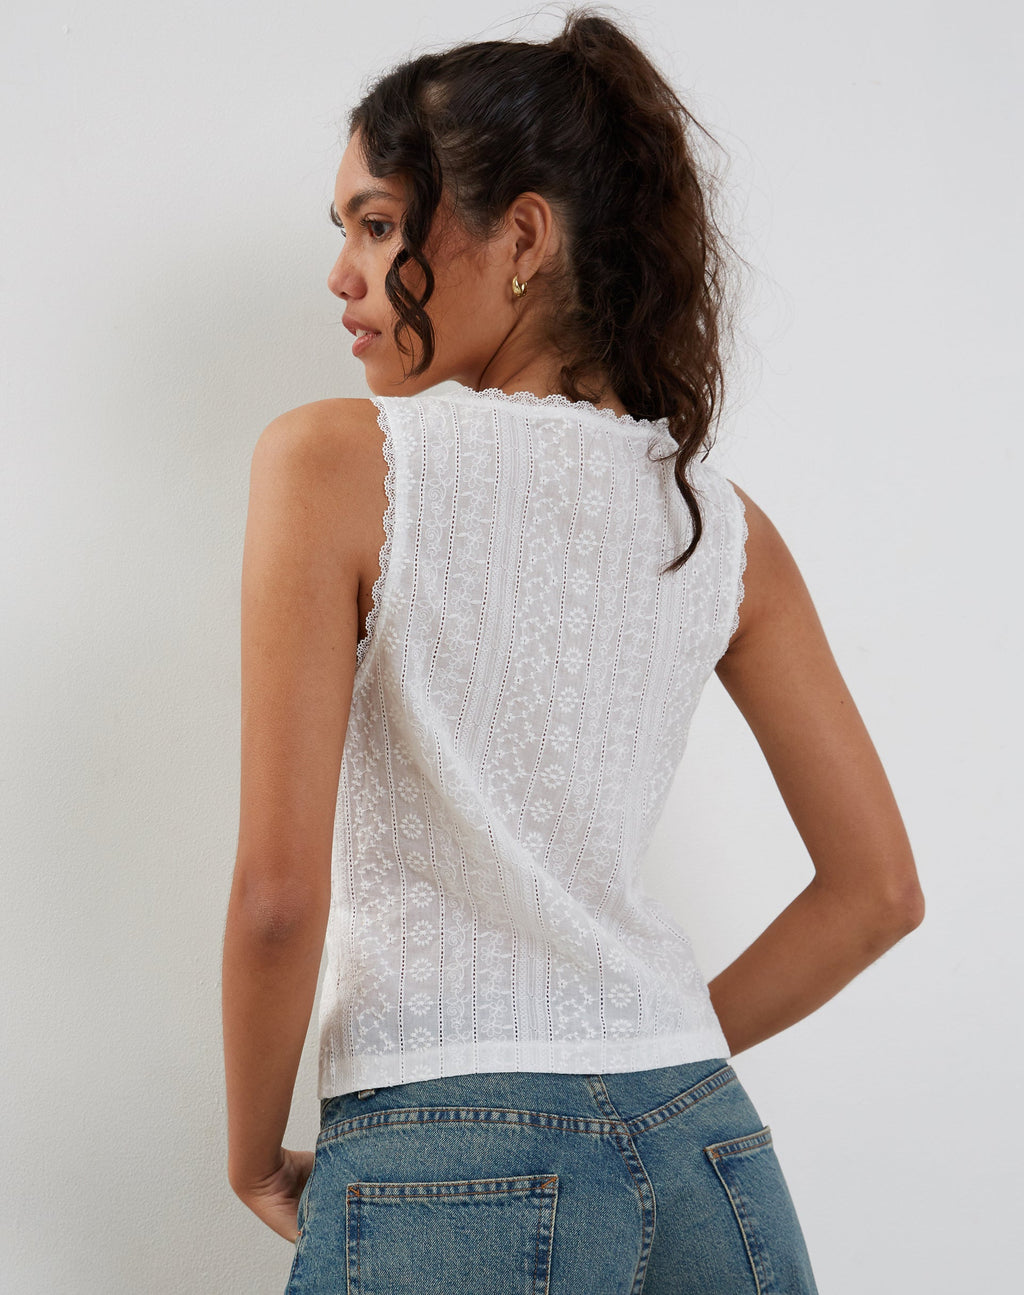 Vezia Broderie Sleeveless Top in White with Rose Embroidery